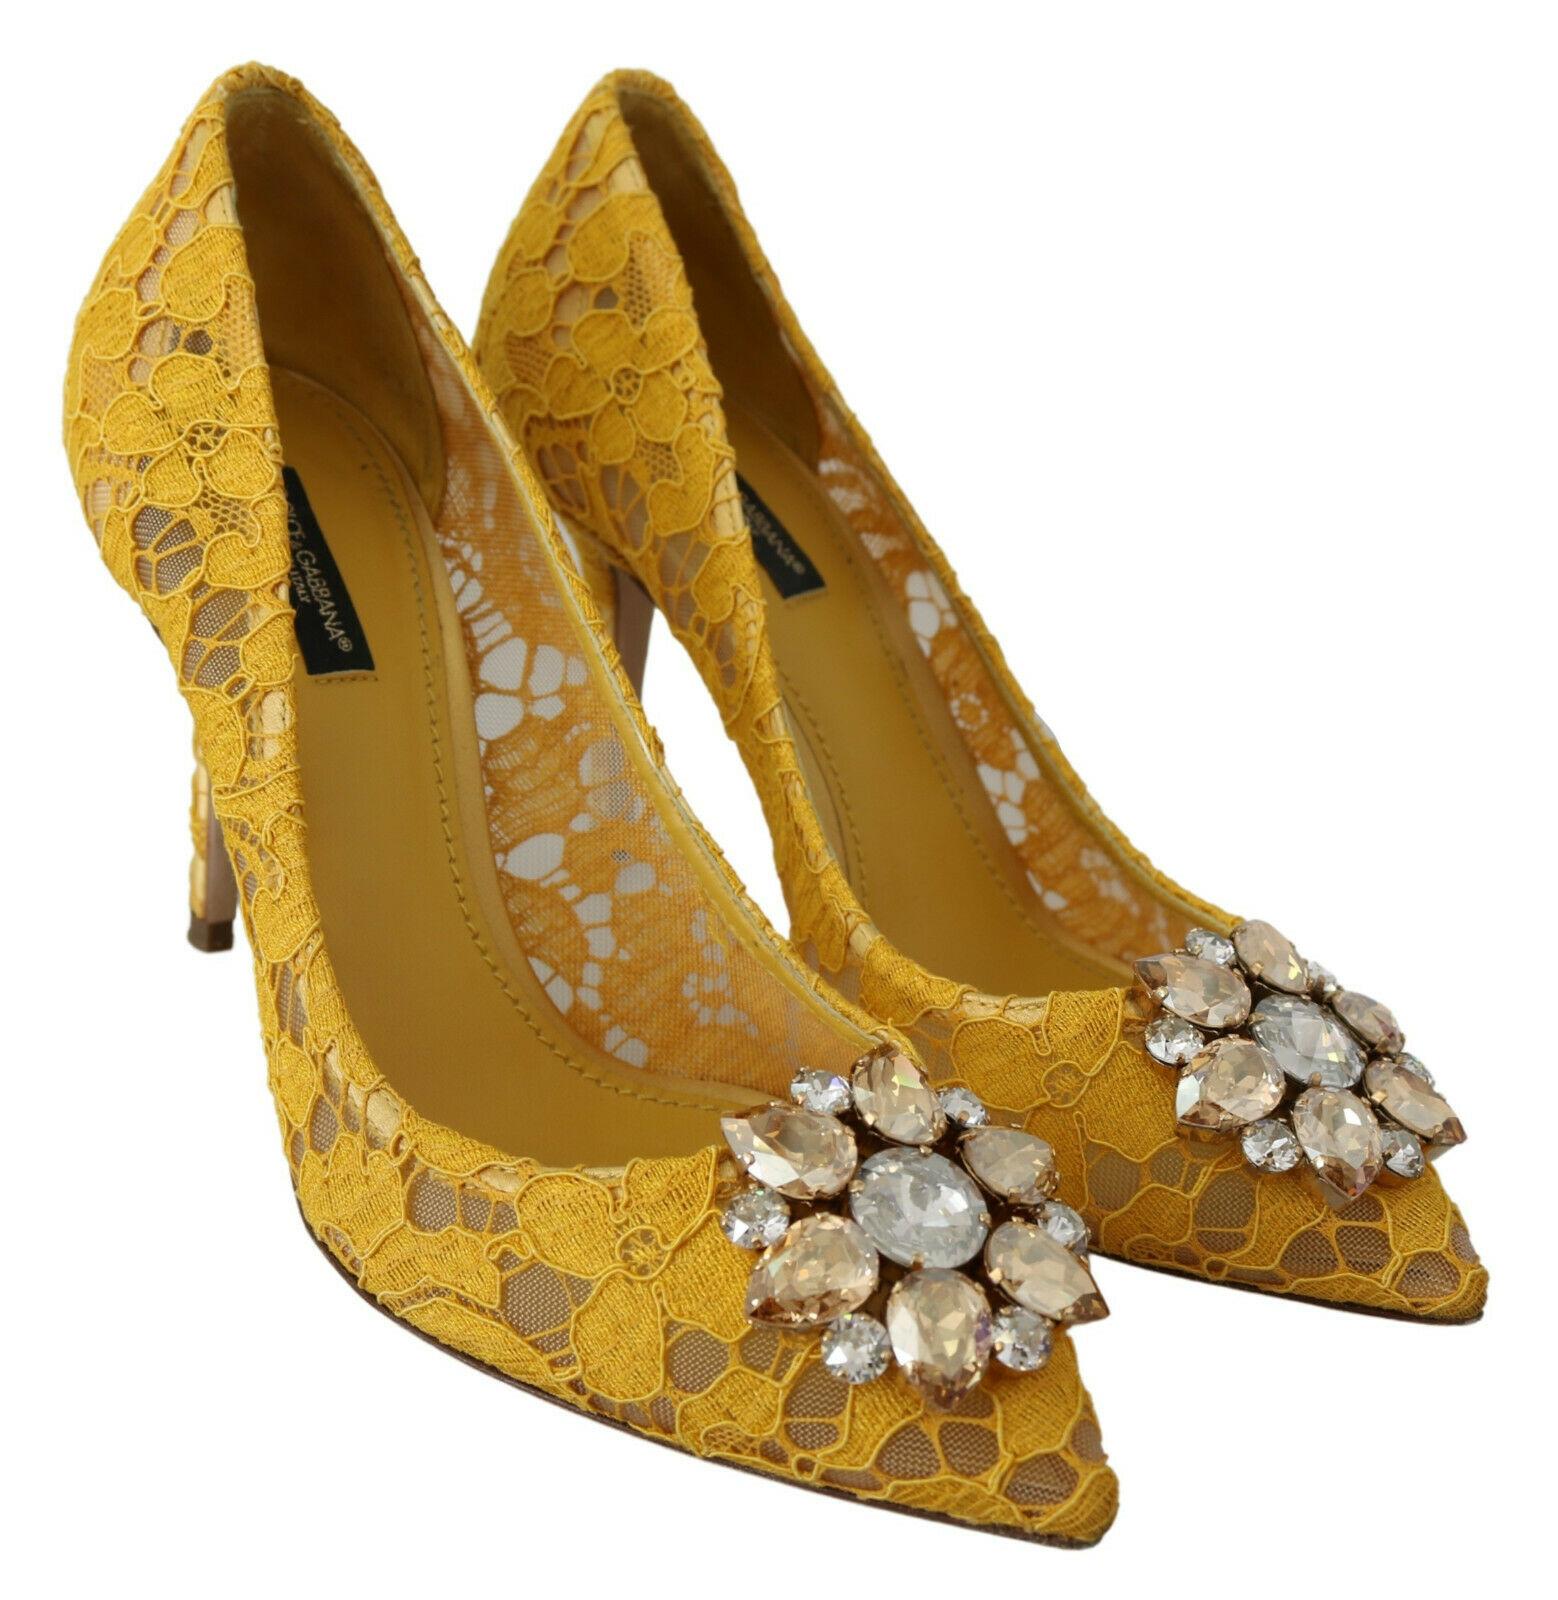 Women's Dolce & Gabbana Yellow Lace Pointy Pumps Heels Shoes Floral Jewel Leather